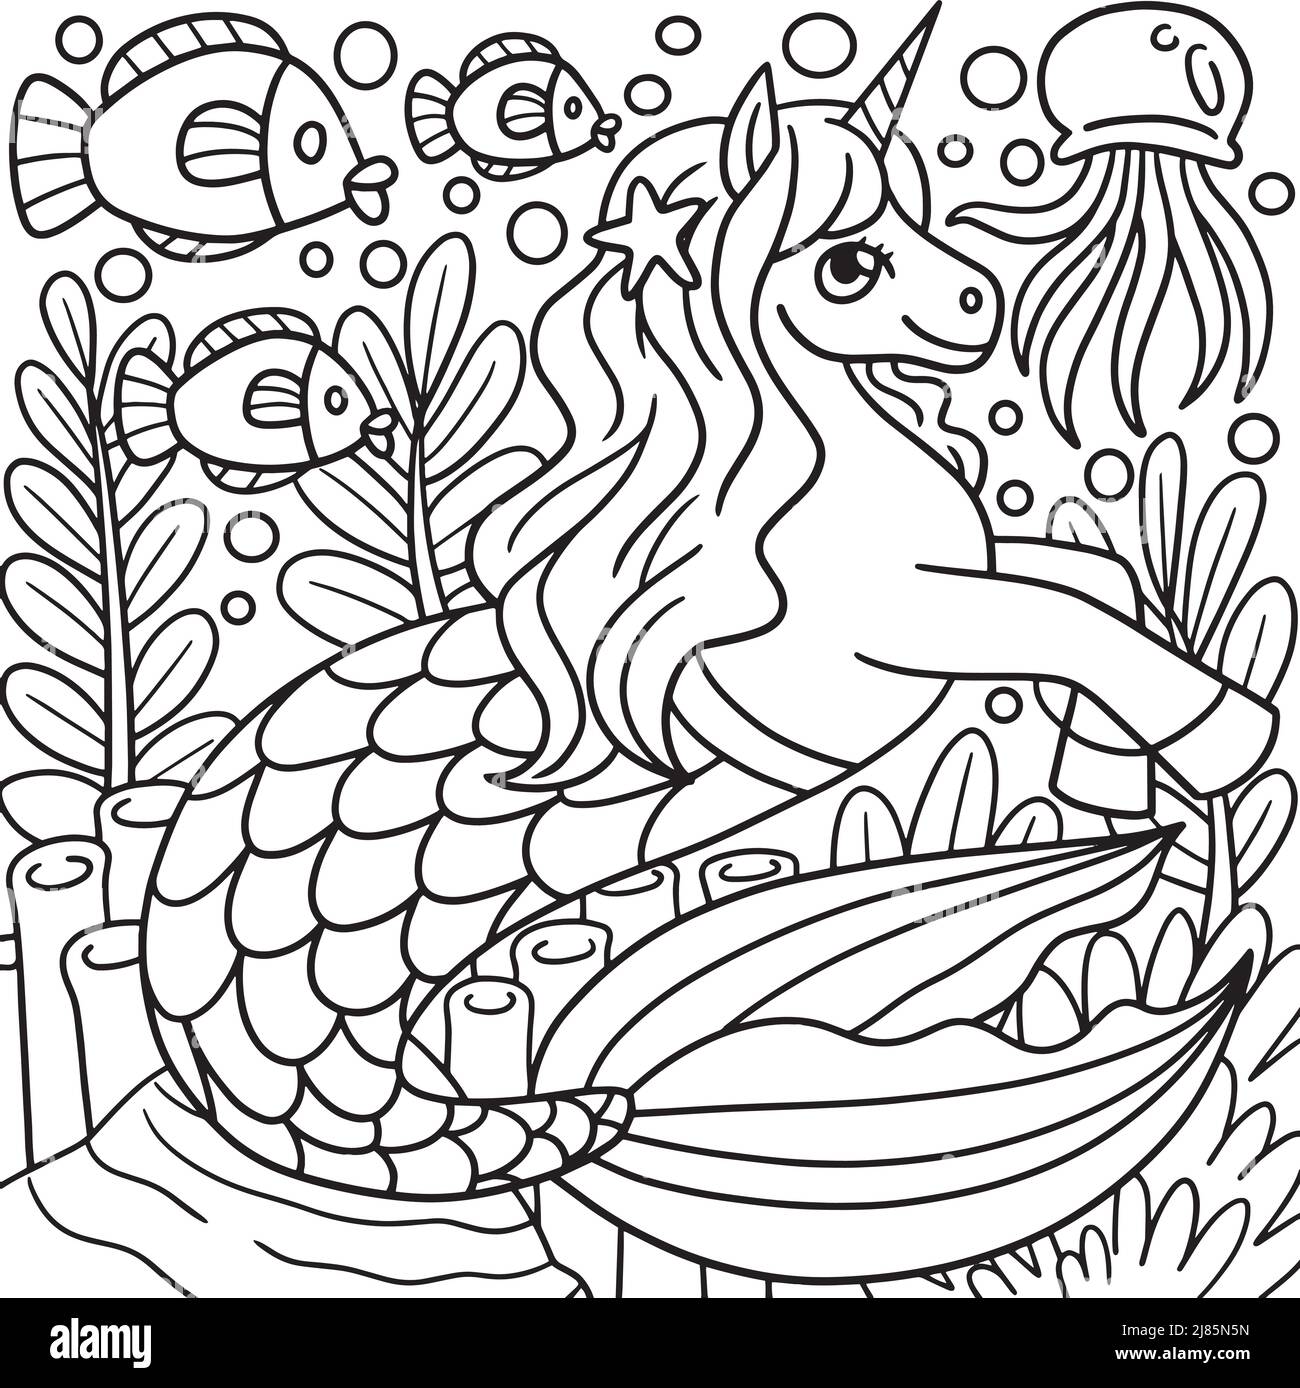 Mermaid Unicorn Coloring Page for Kids Stock Vector Image & Art - Alamy